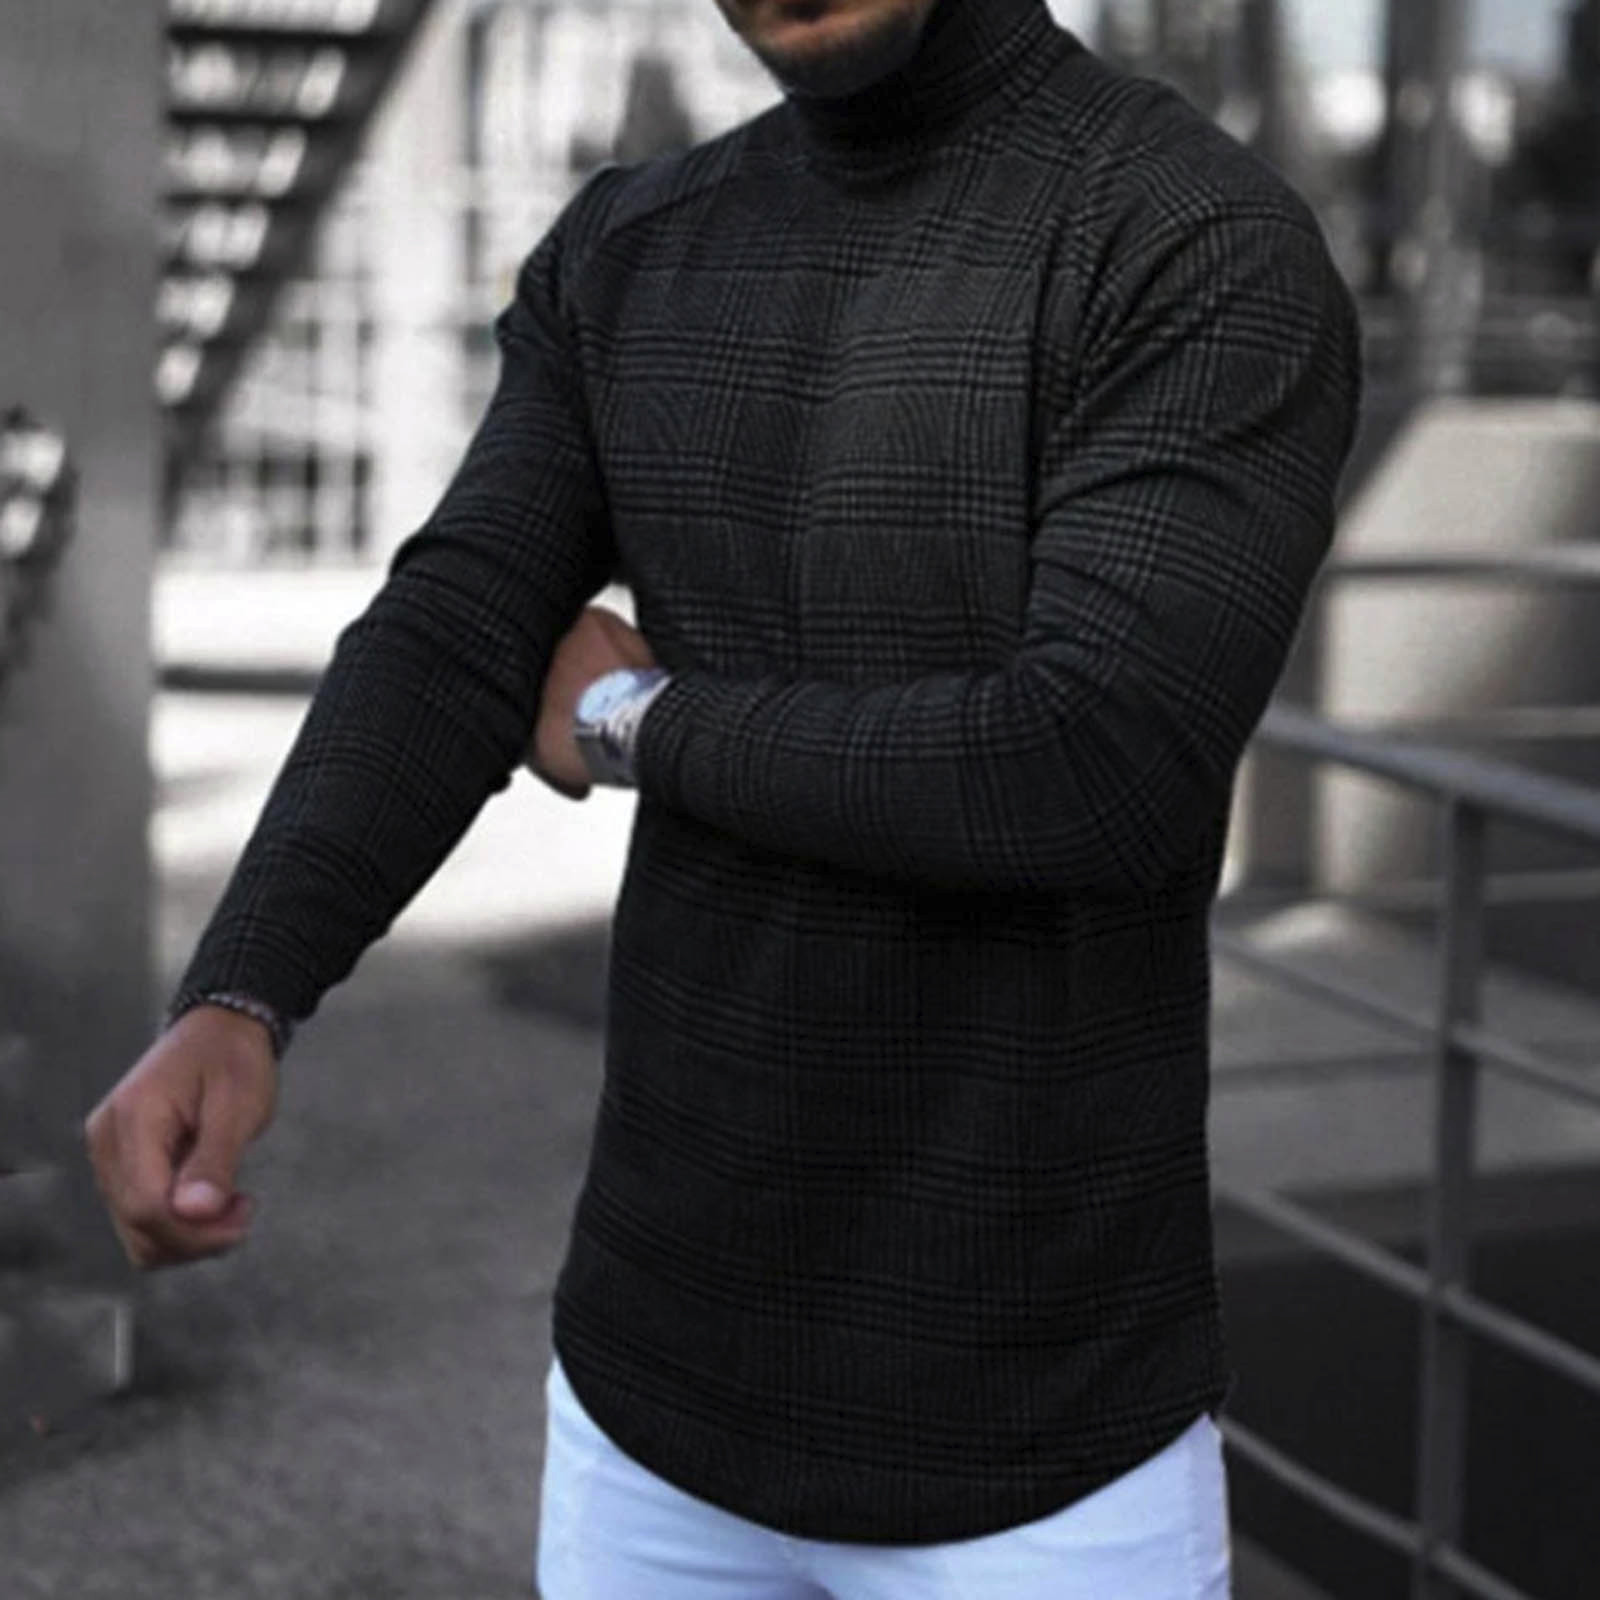 Men's Sweaters Fashion Men Turtleneck Long Sleeve Houndstooth Printed Slim Sweater Pullover Tops Casual Knitted Jumper Plus Size Pull Homme#35 221028